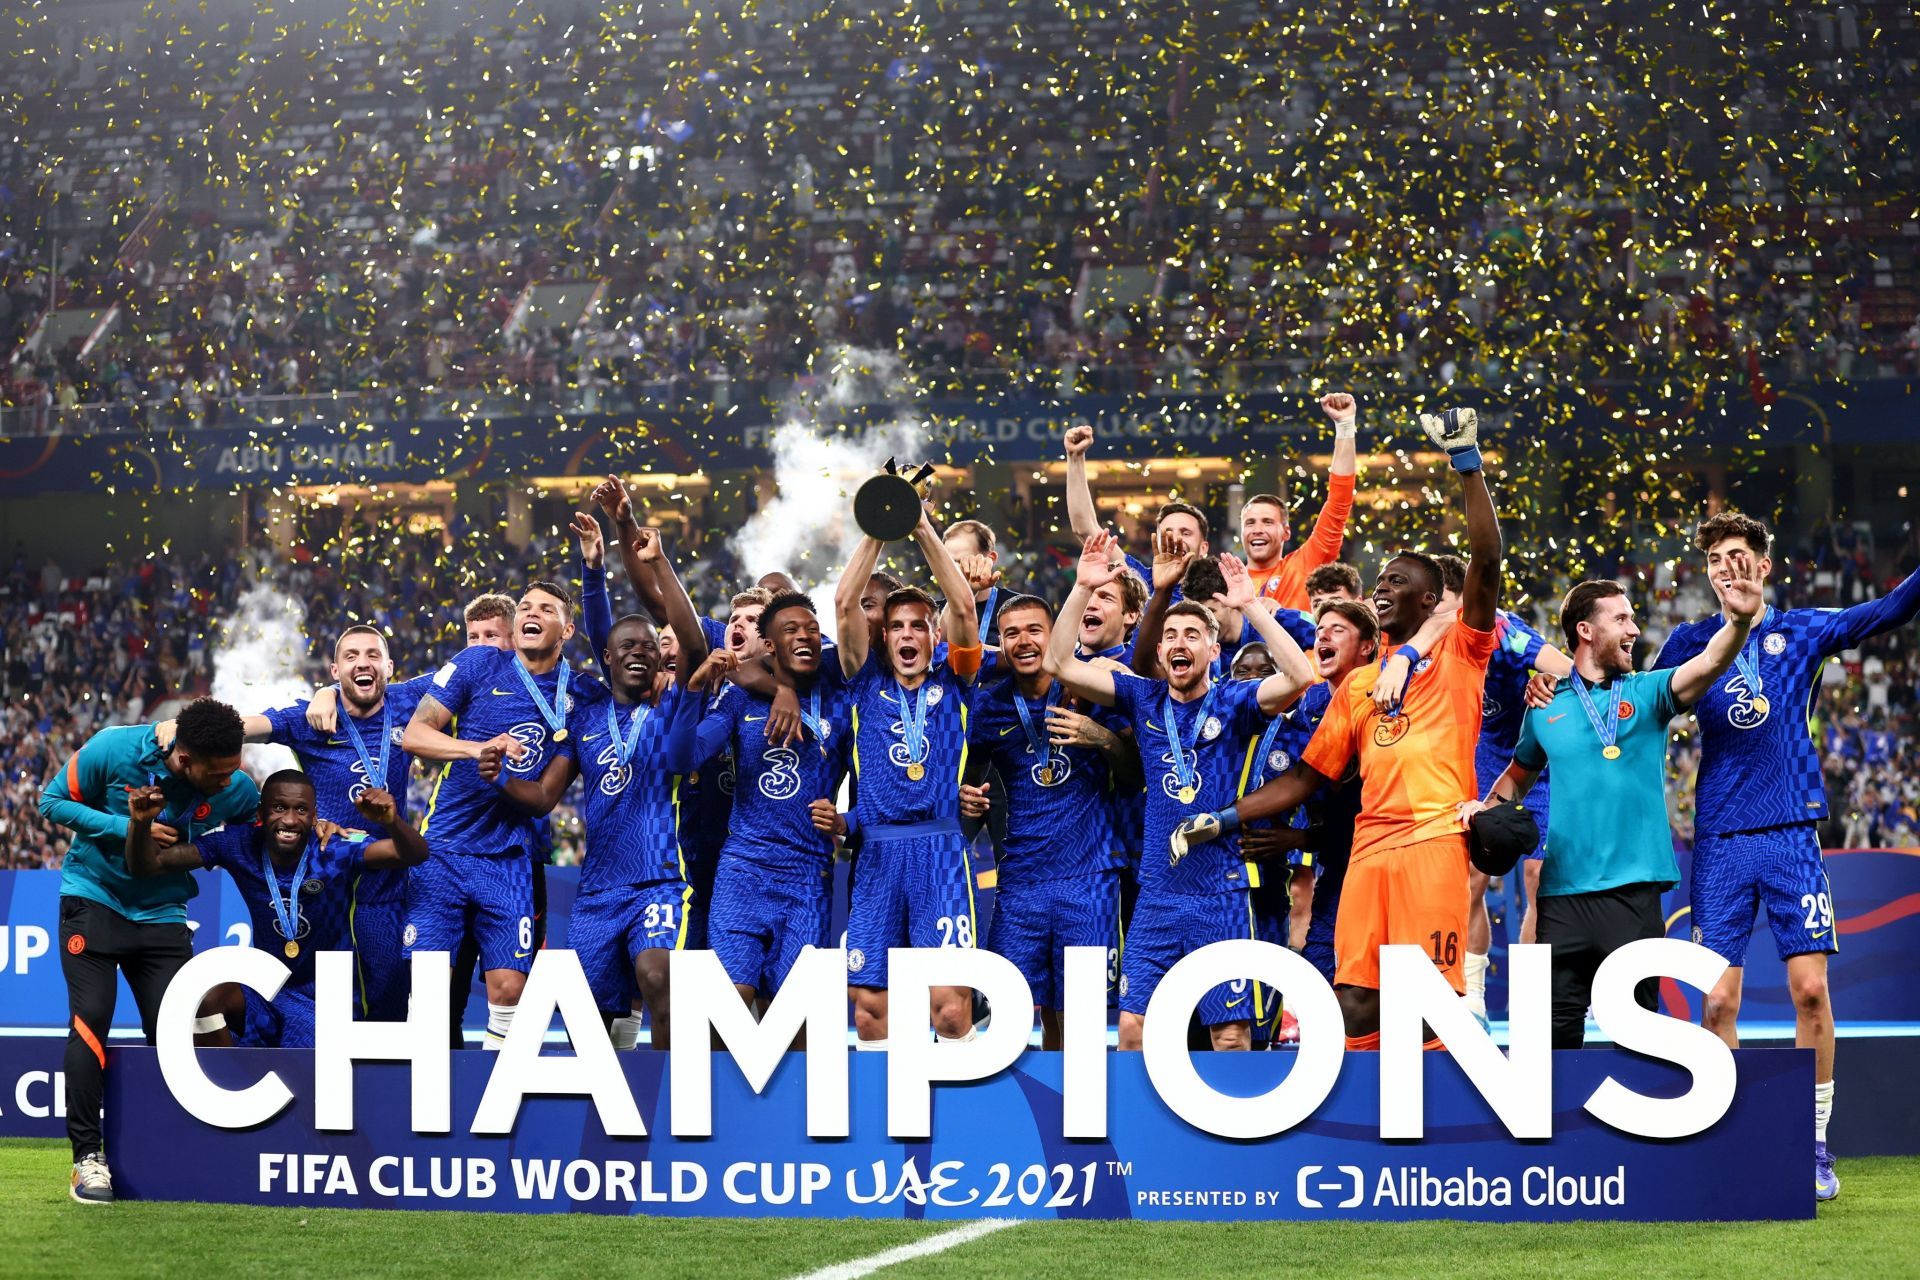 Chelsea are Club World Cup champions after beating Palmeiras.